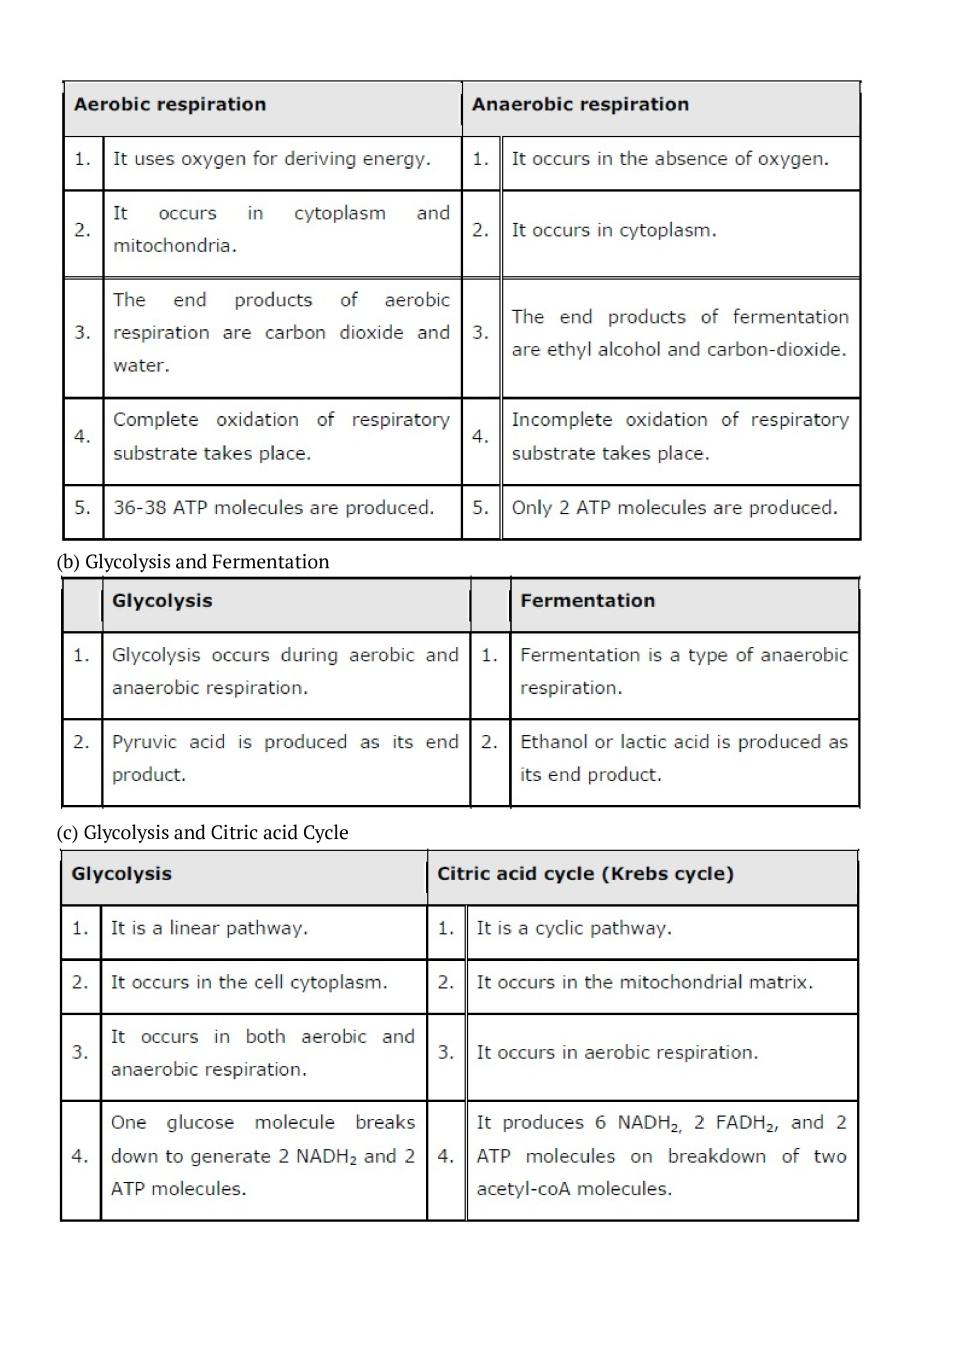 NCERT Solutions for Class 11 Biology Chapter 14 Respiration in Plants